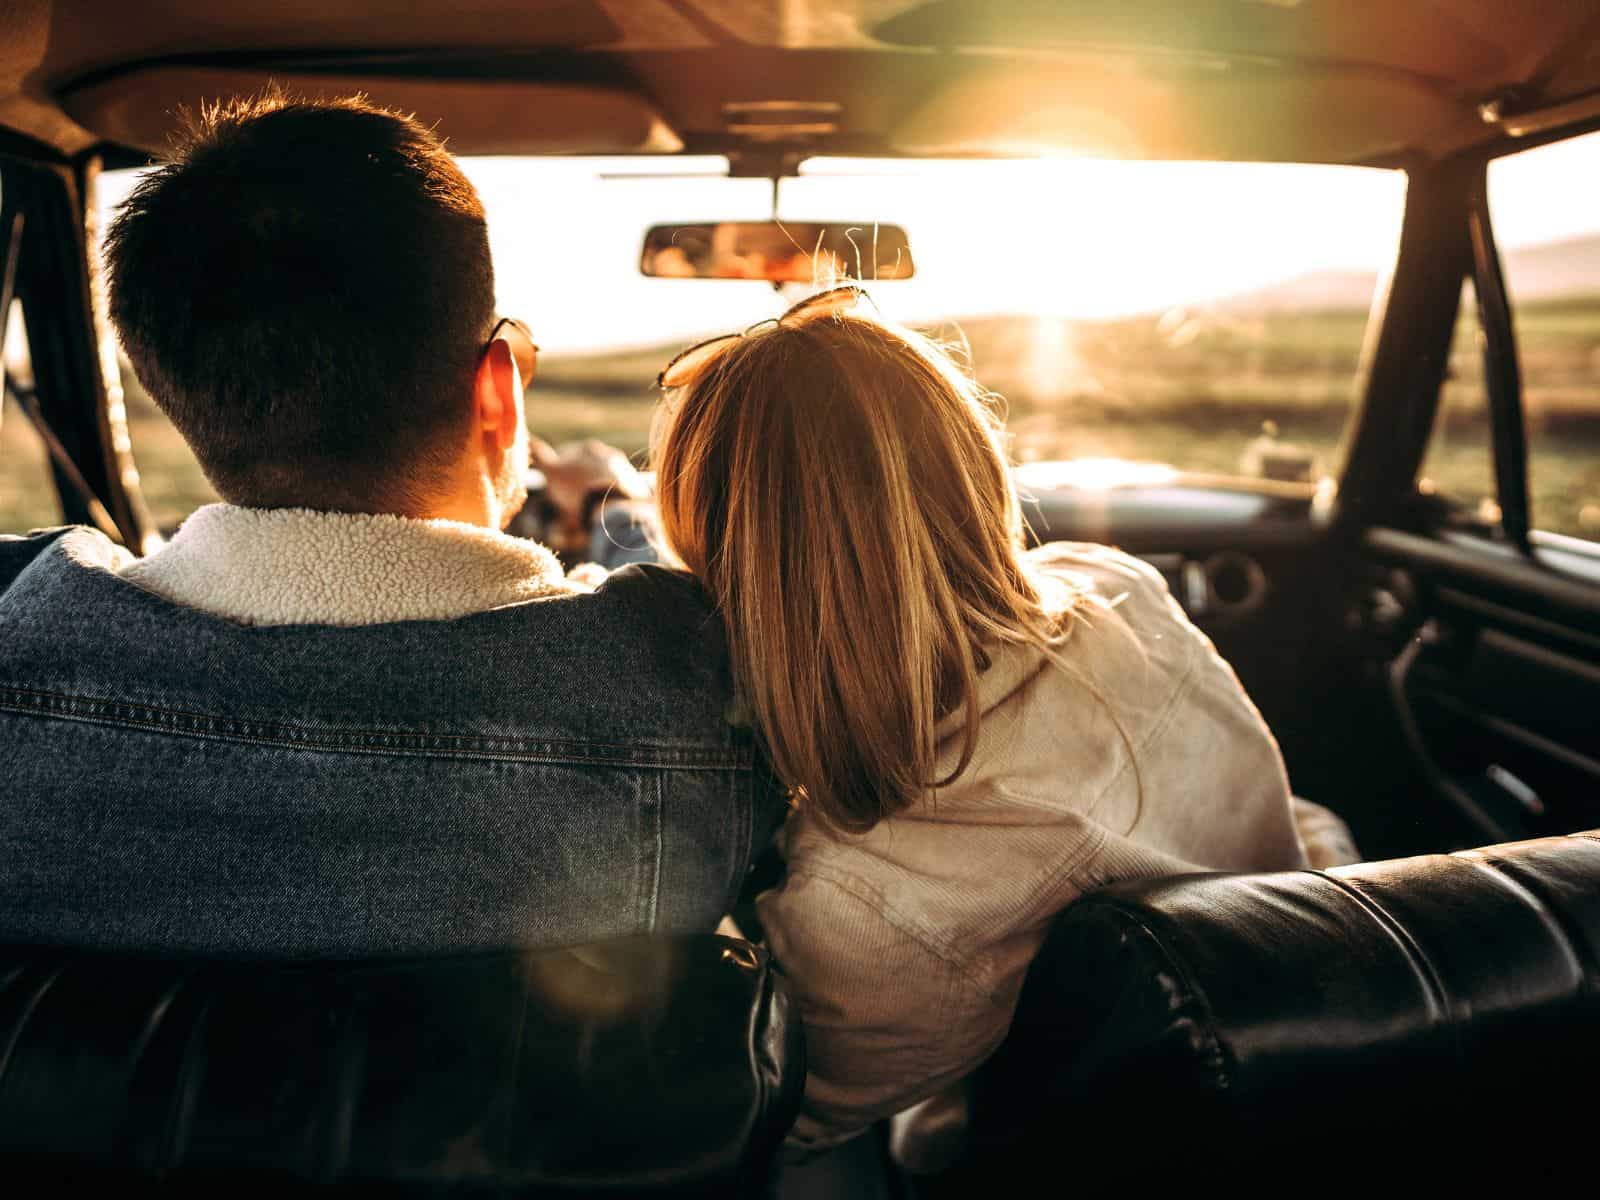 Couple on a road trip in a car.